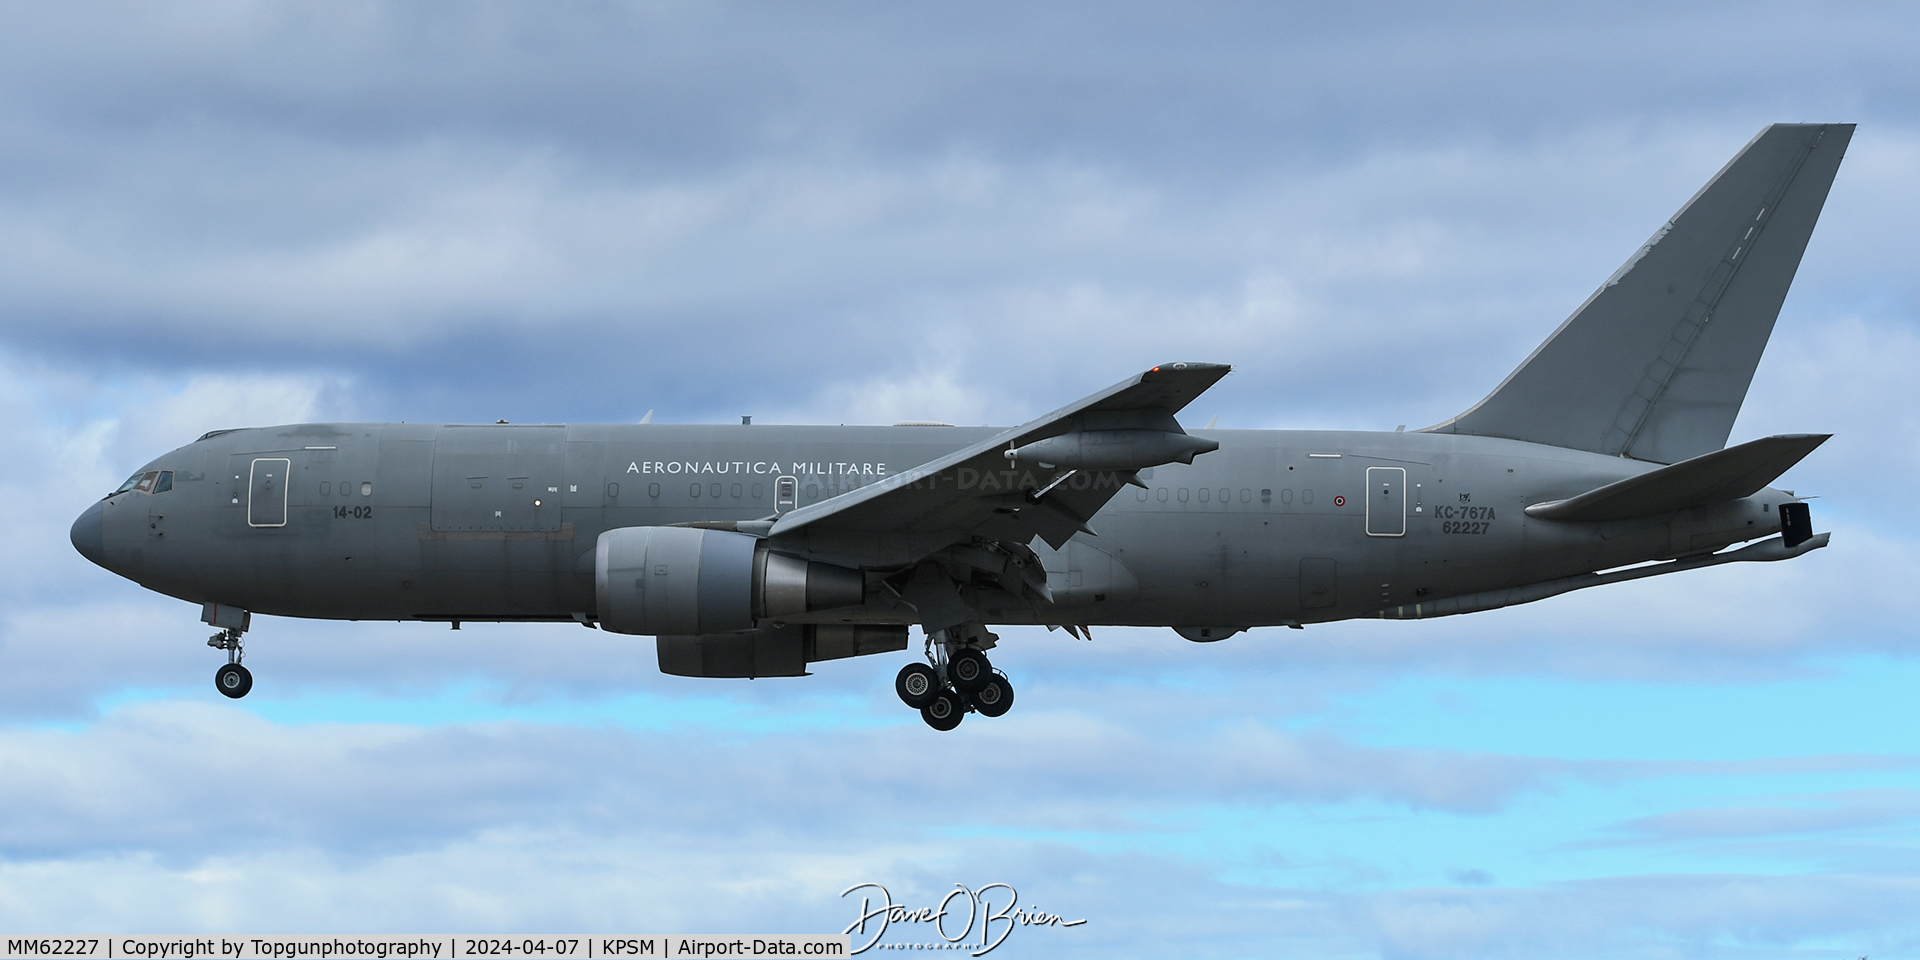 MM62227, 2005 Boeing KC-767A C/N 33687, IAM1425 ferried the 2nd group of 35's from Lajes for RF AK-24